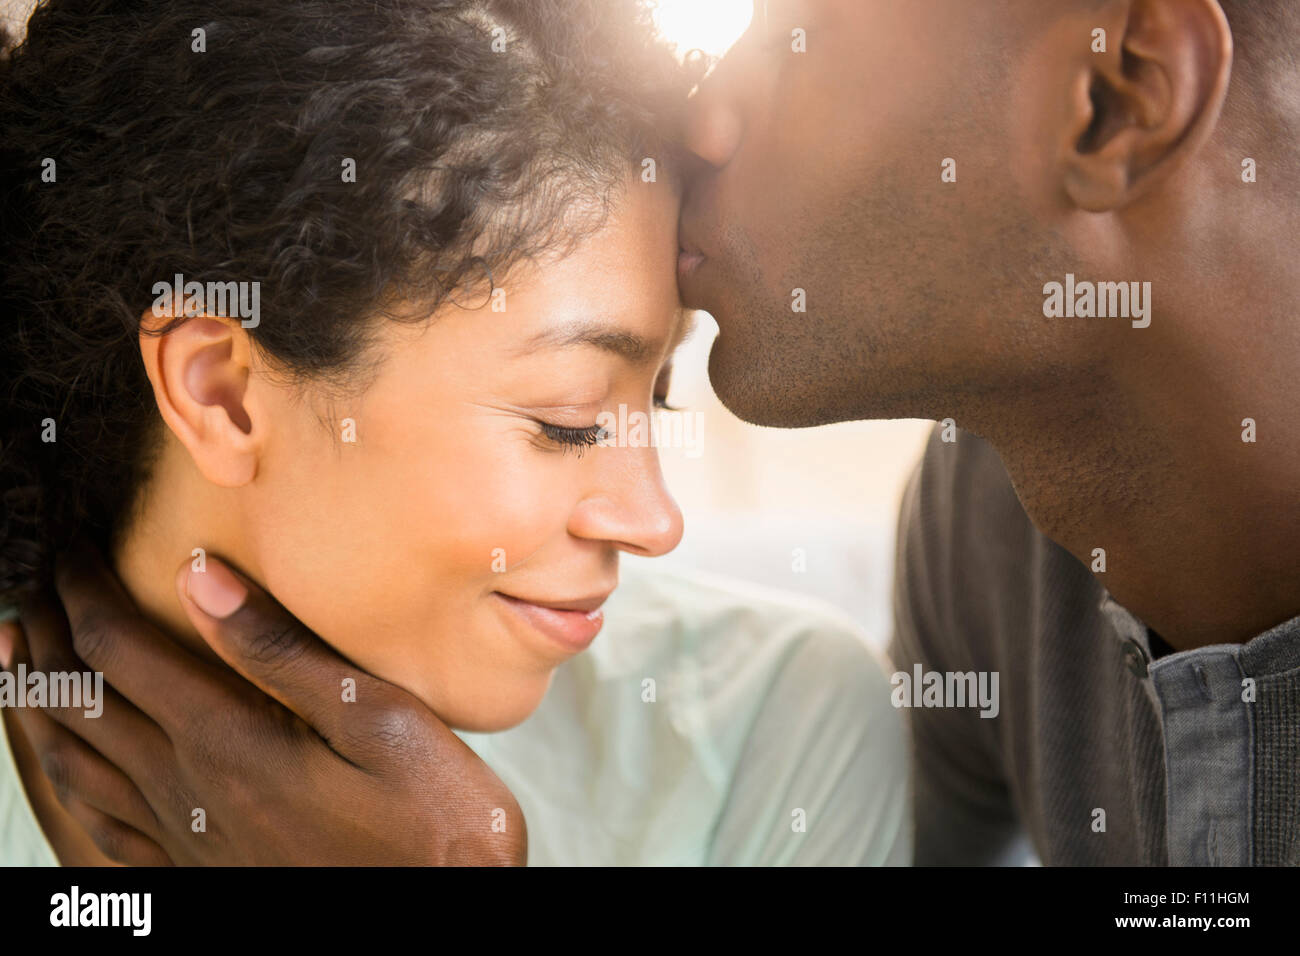 Close up of smiling couple kissing Banque D'Images